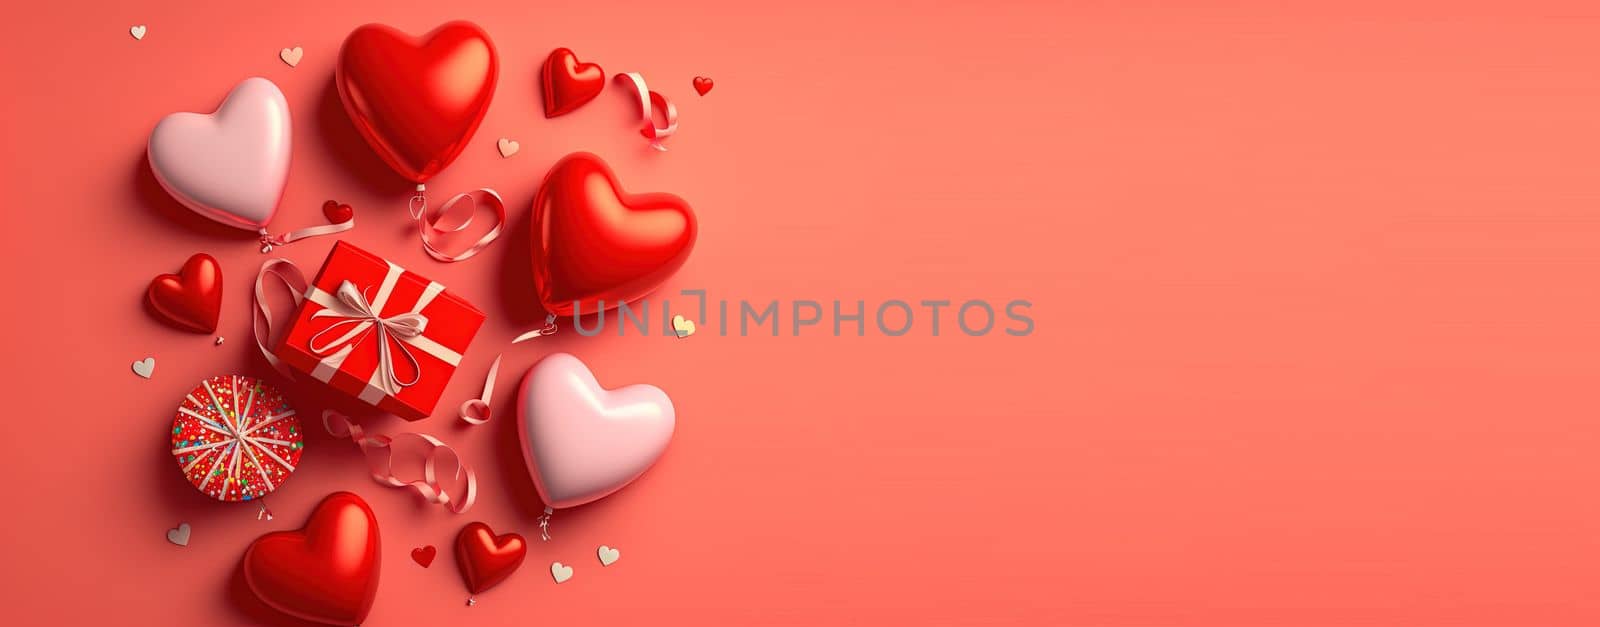 Valentine's Day banner with a sparkling red 3D heart by templator